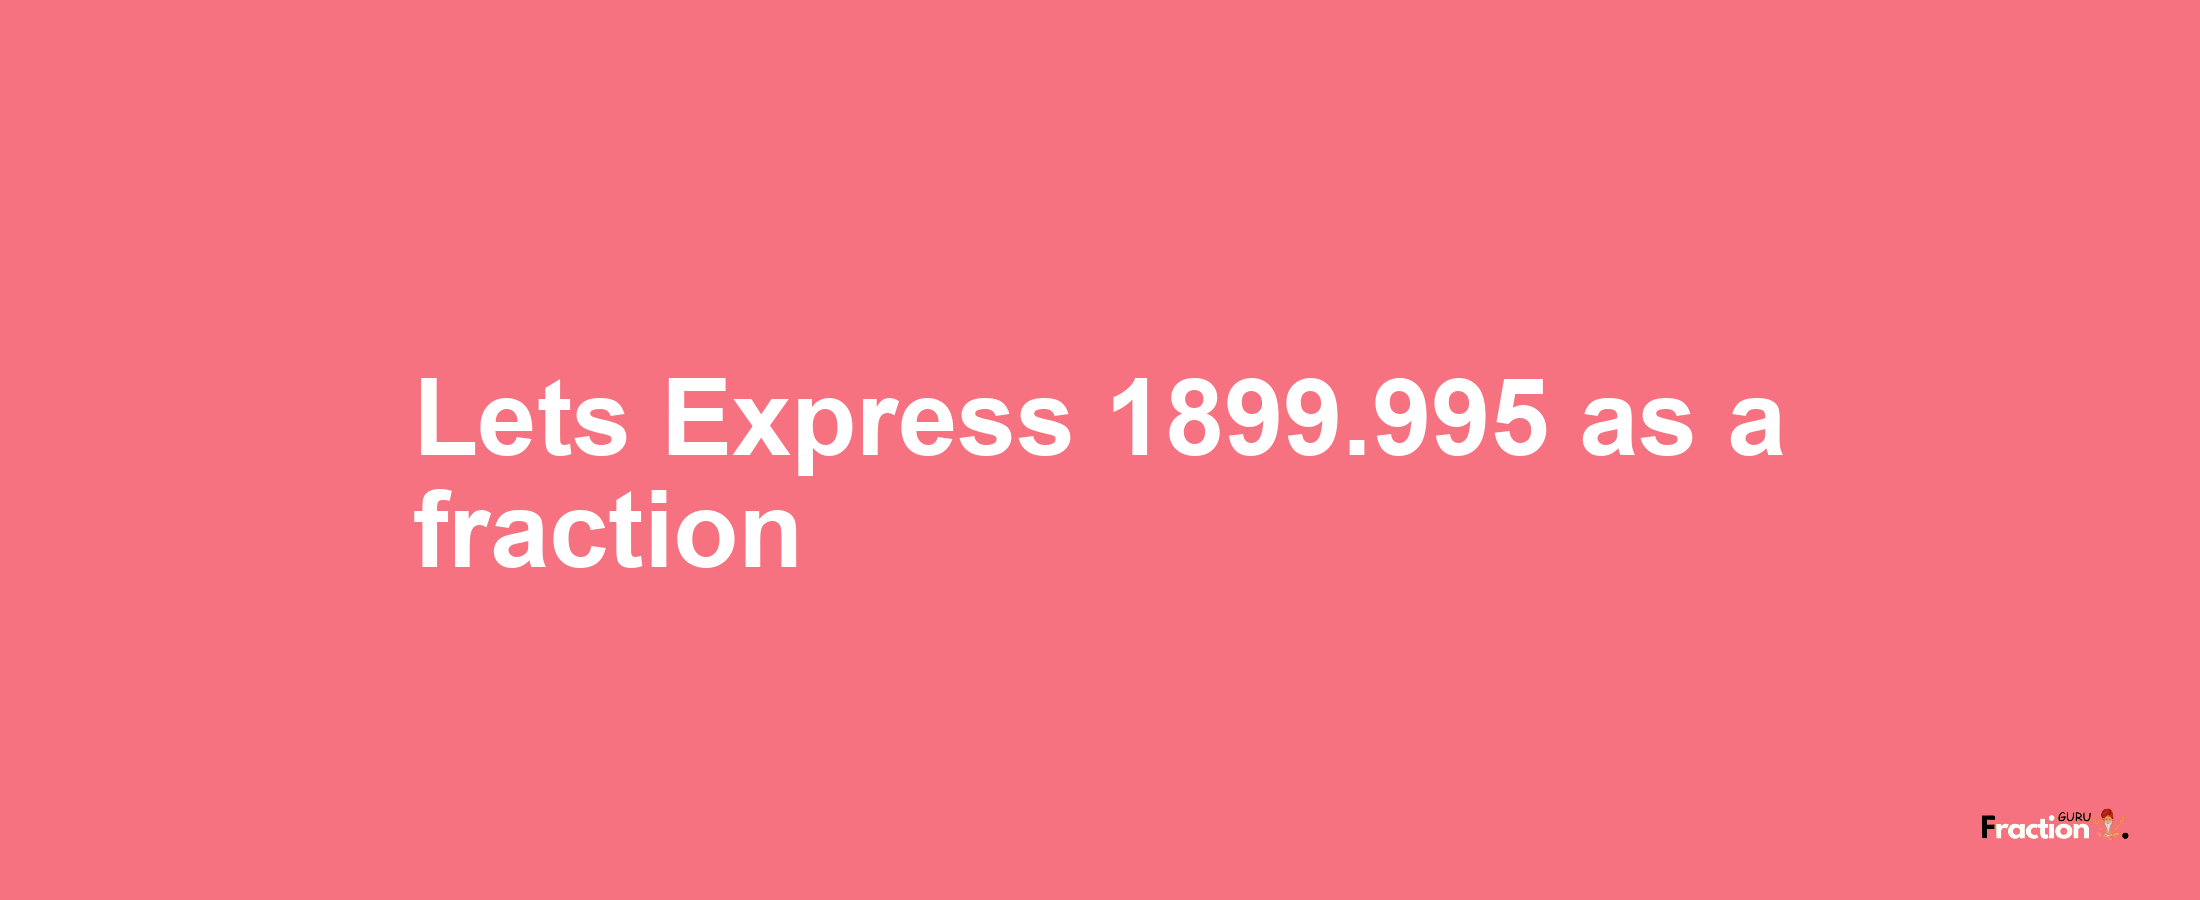 Lets Express 1899.995 as afraction